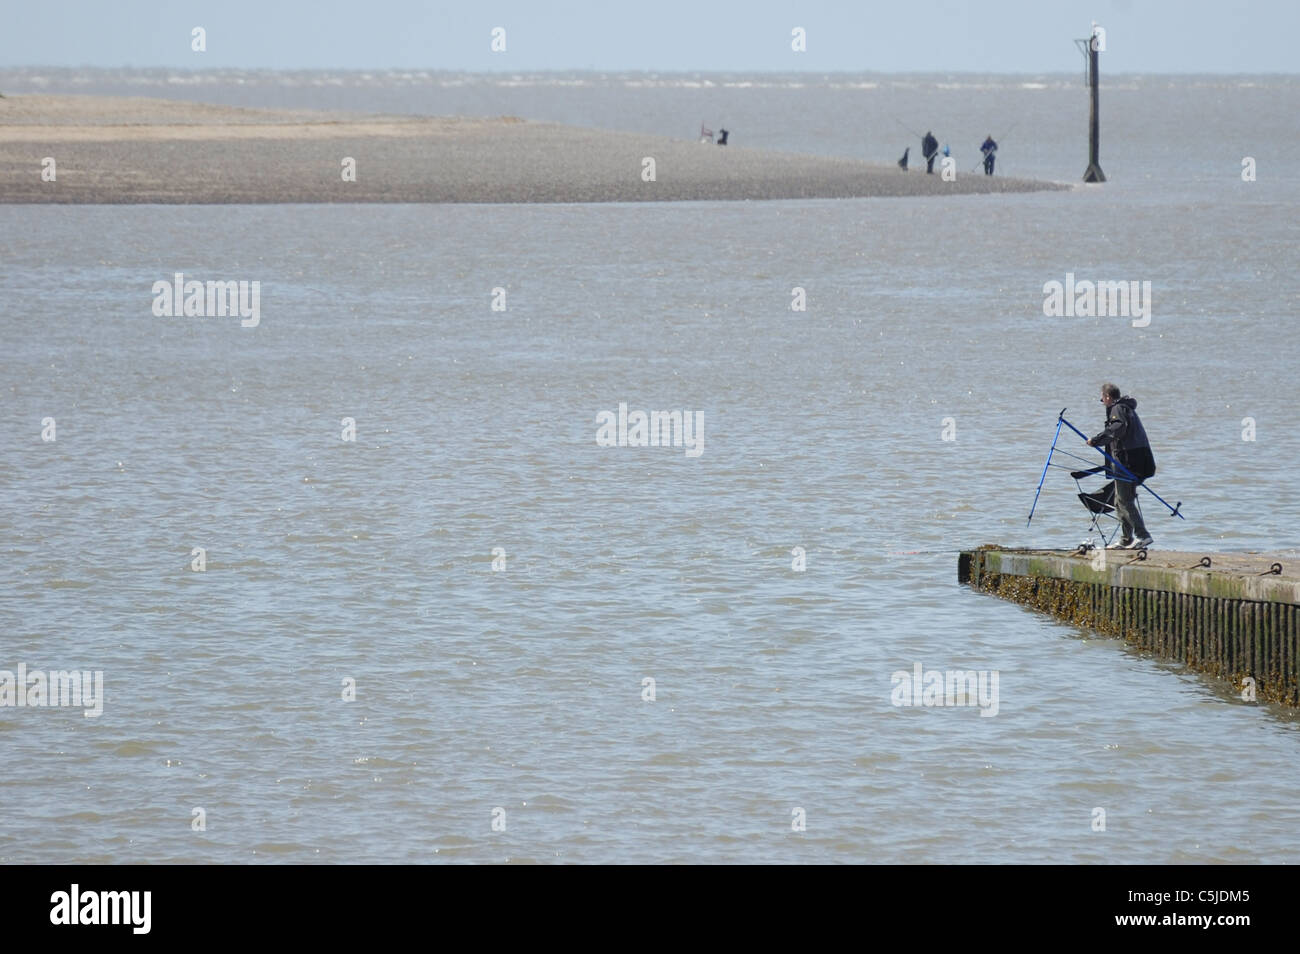 An angler setting up equipment at end of stone jetty slipway Stock Photo